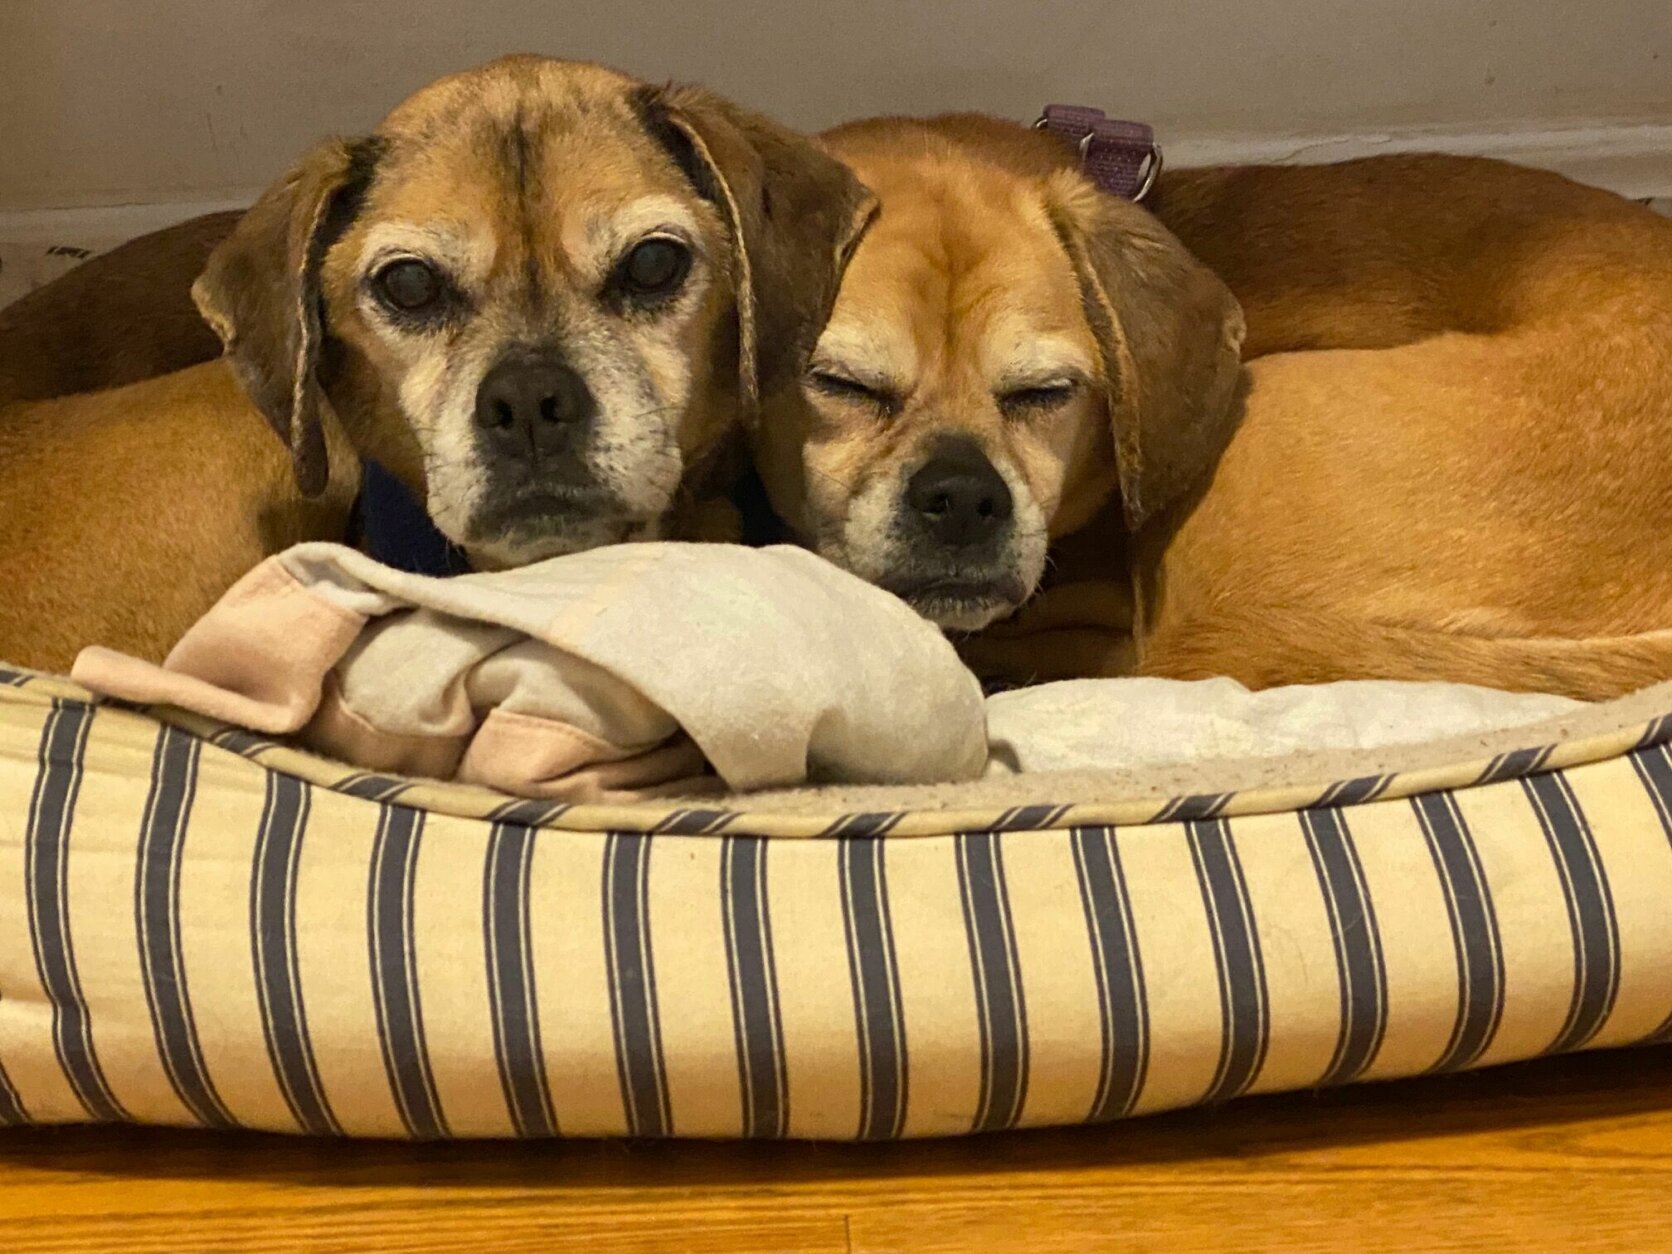 <p>Meet the darling duo—Mia and Bode! They are 15 years old but don&#8217;t let their age fool you. These two still live their lives to the fullest. Mia is the more mellow member of the team while Bode is a bit more of a busy body. Both enjoy getting petted and loved and Bode really loves to be parked in his fosters lap. Both have hearts of gold and they do well with mellow dogs and cats. Mia and Bode are seeking a gentle retirement home where they will be loved and cared for. Can you be the wonderful home these precious Puggles need? Mia and Bode are a bonded pair and must be adopted together! To learn more visit humanerescuealliance.org/adopt.</p>
